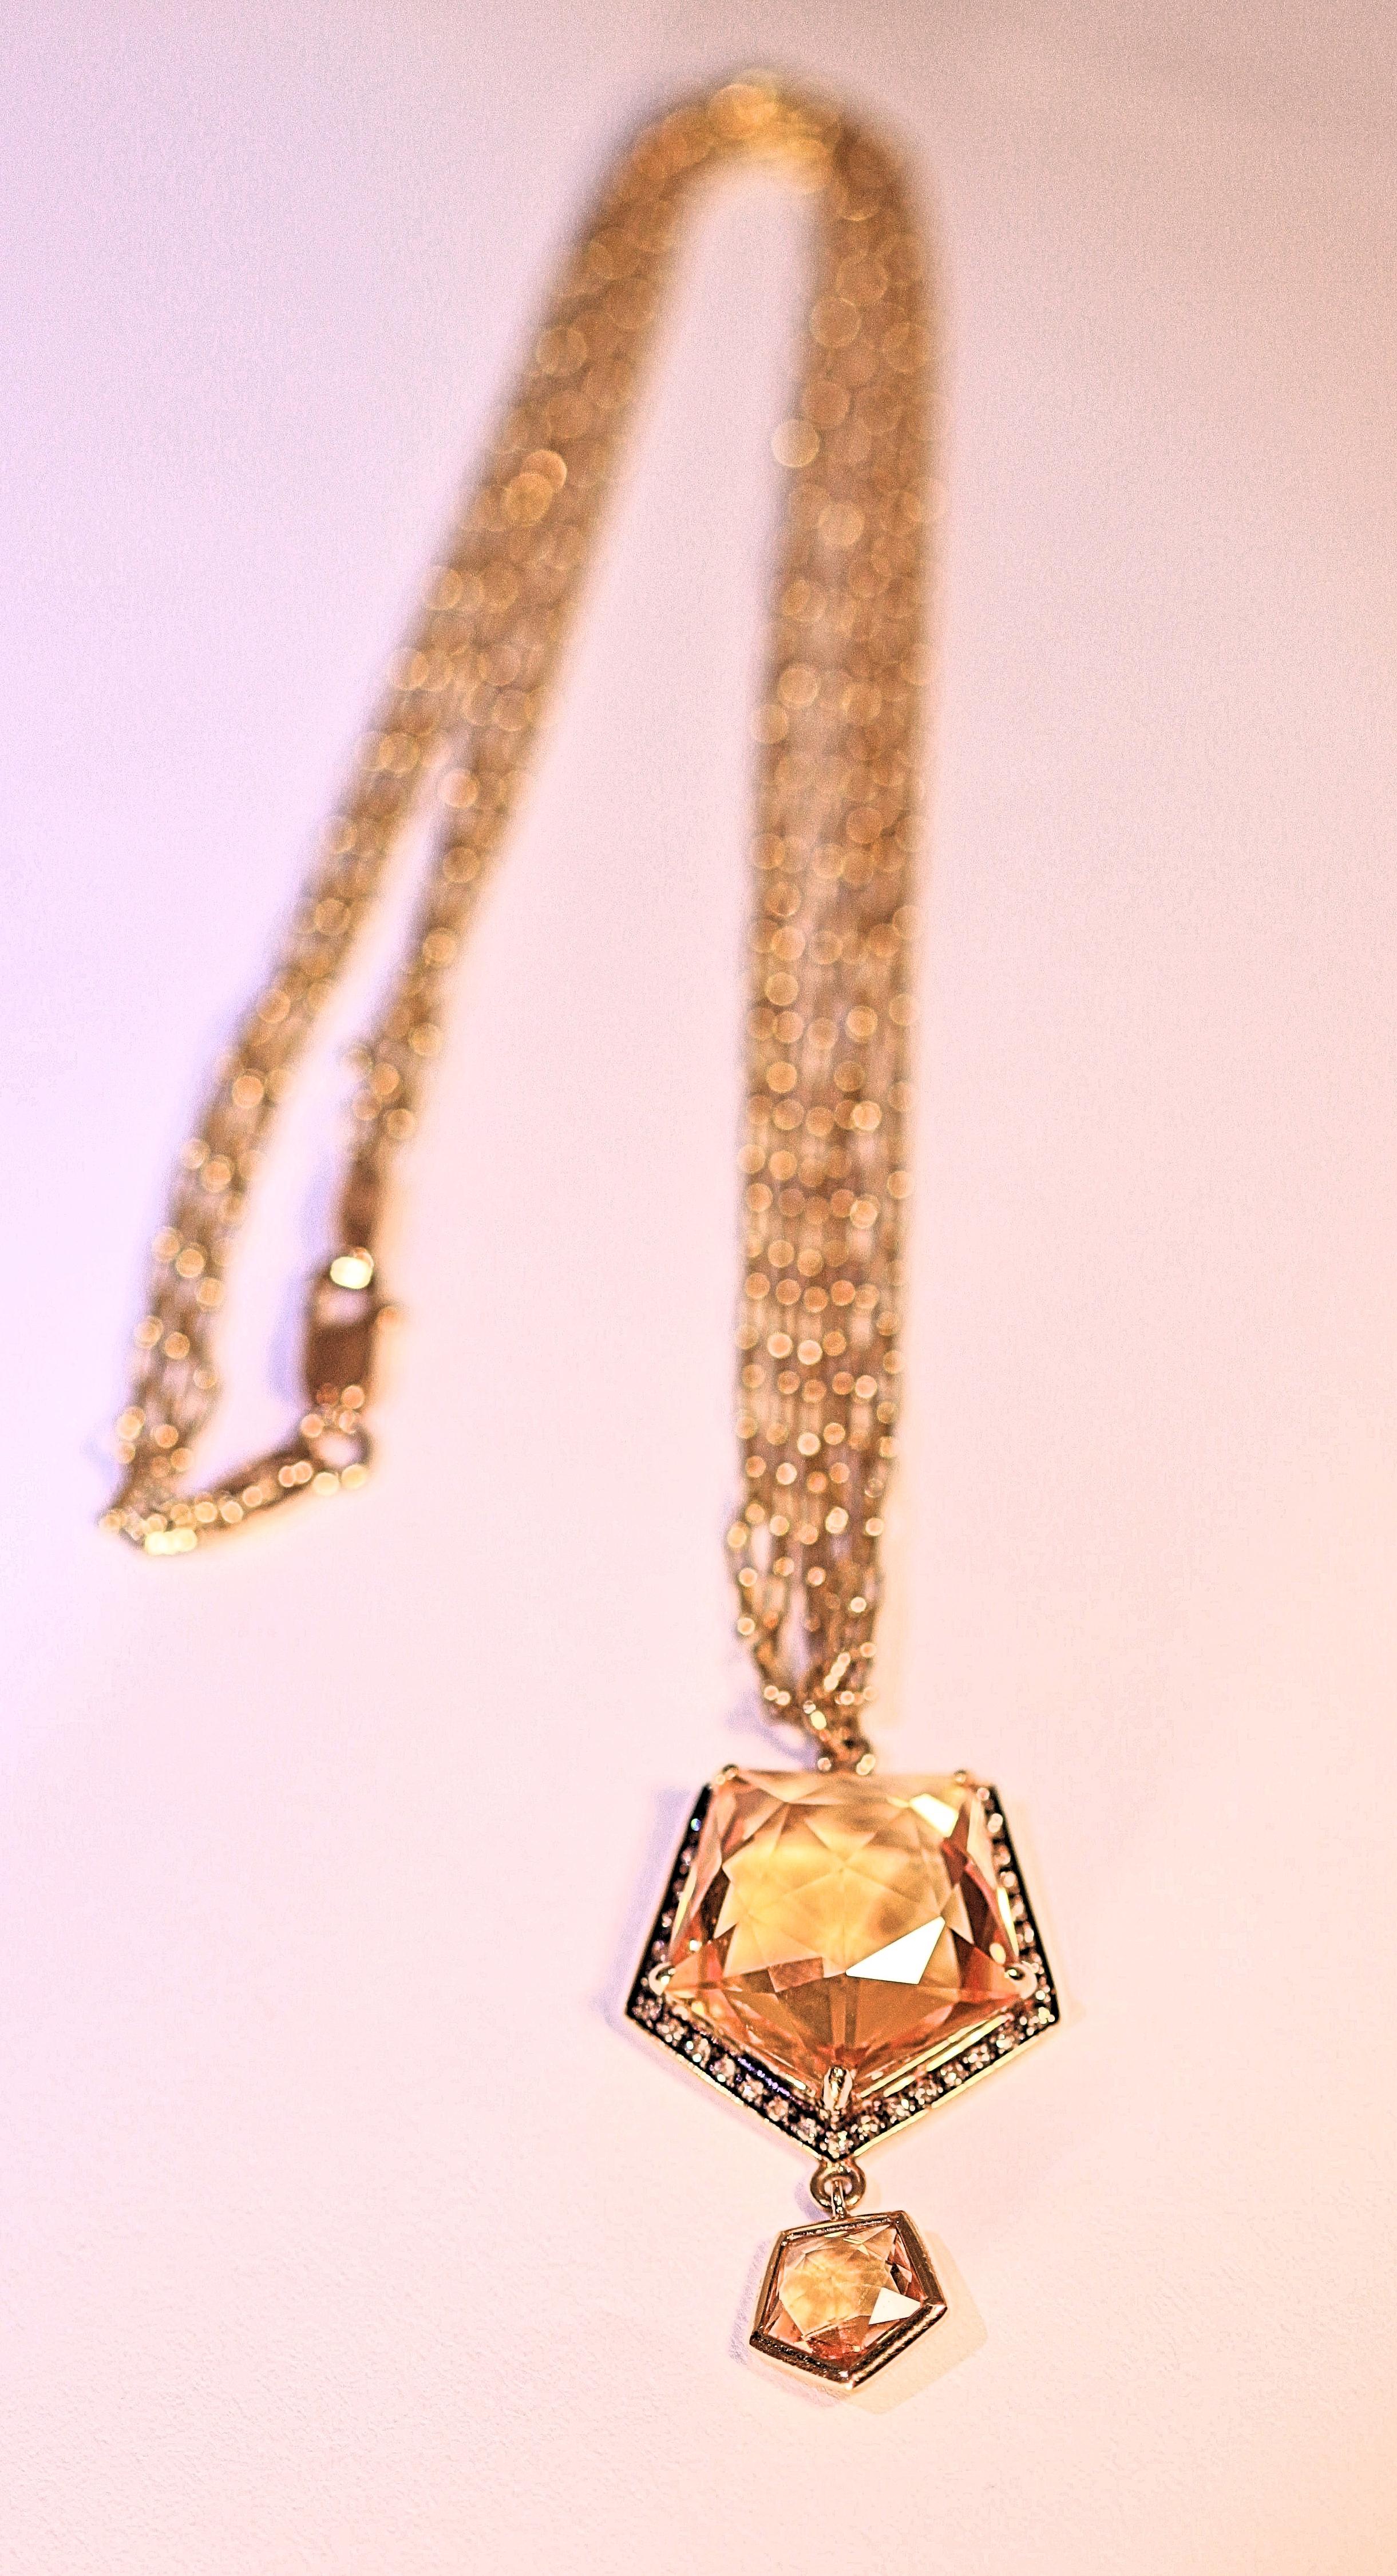 A delightful 18 karat yellow gold pendant with one large citrine and one small citrine.  The large citrine is surrounded by small brown diamonds with .21 carat total weight.  The dangling citrines measure  1 1/2 inches long.  The chain is a triple